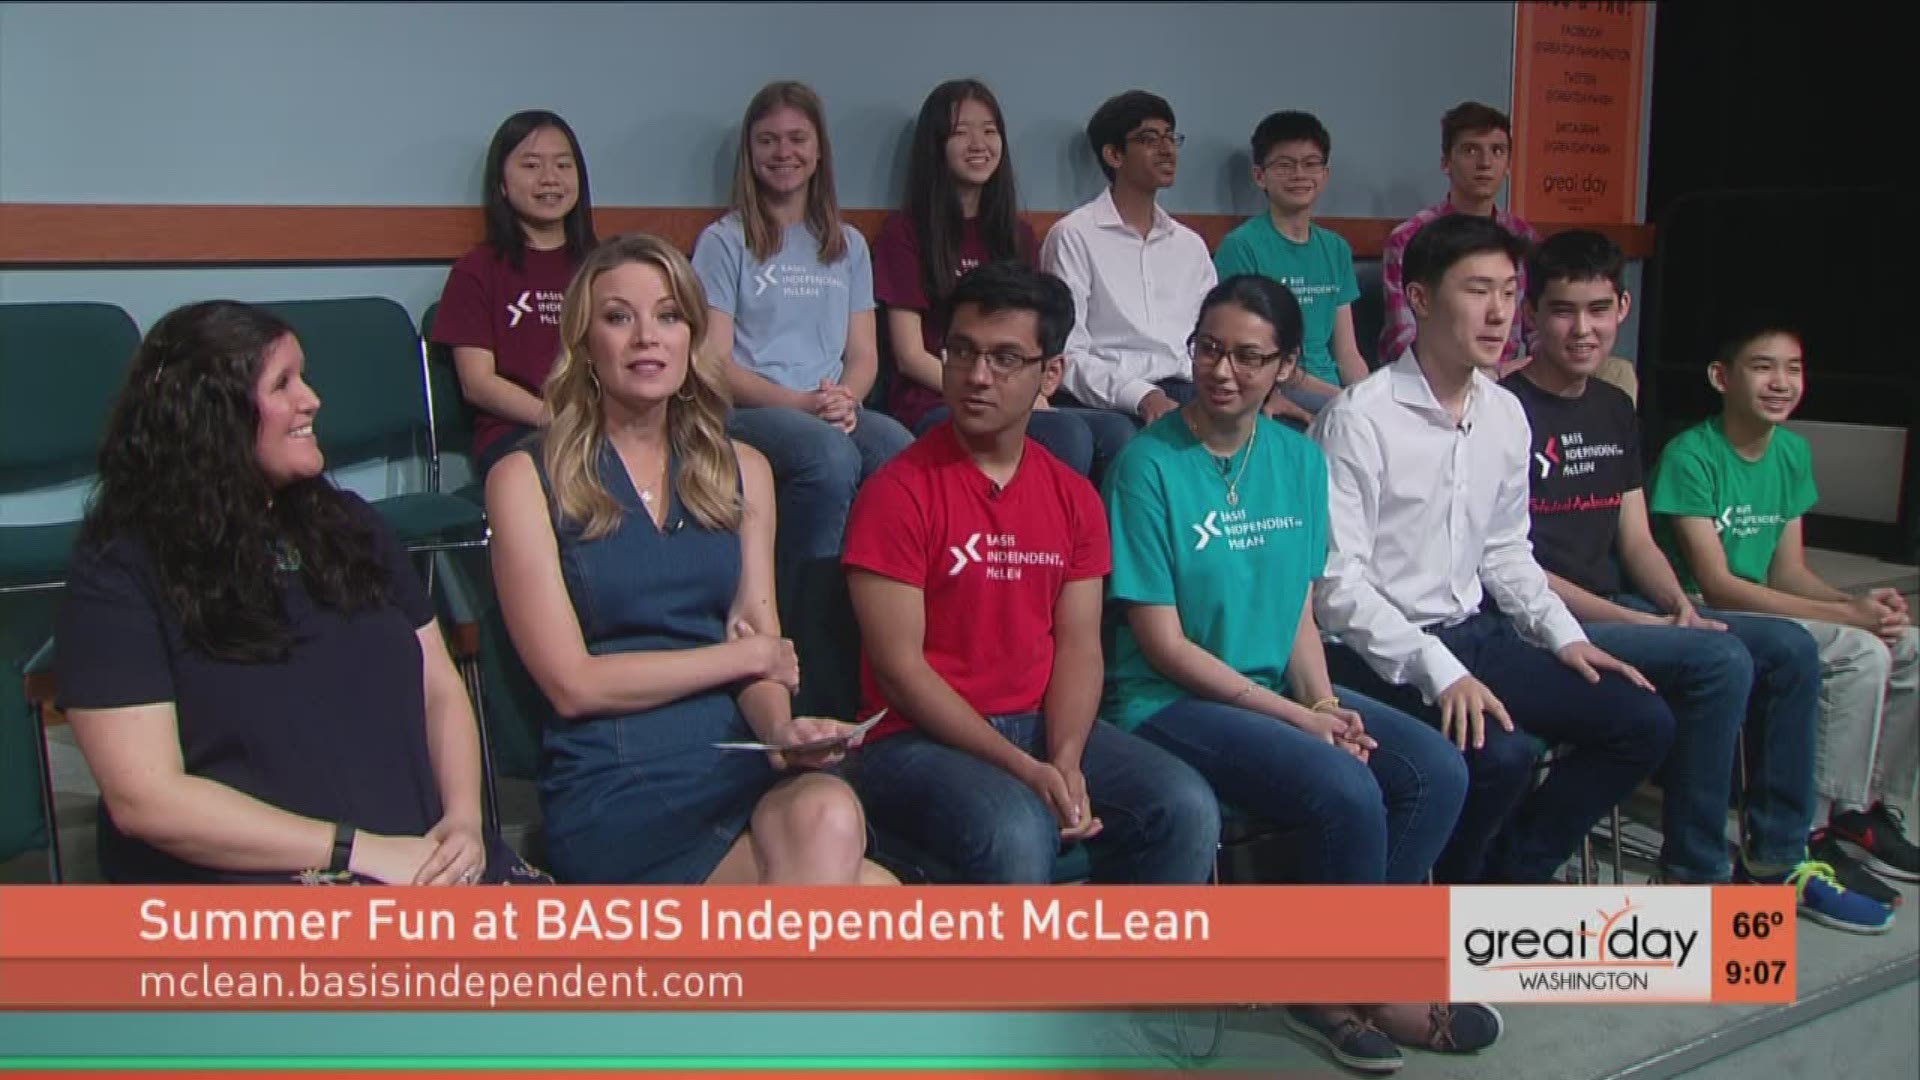 BASIS Independent McLean has some unique summer camps to help prepare students for the next school year. Find out how to get involved at https://mclean.basisindependent.com.